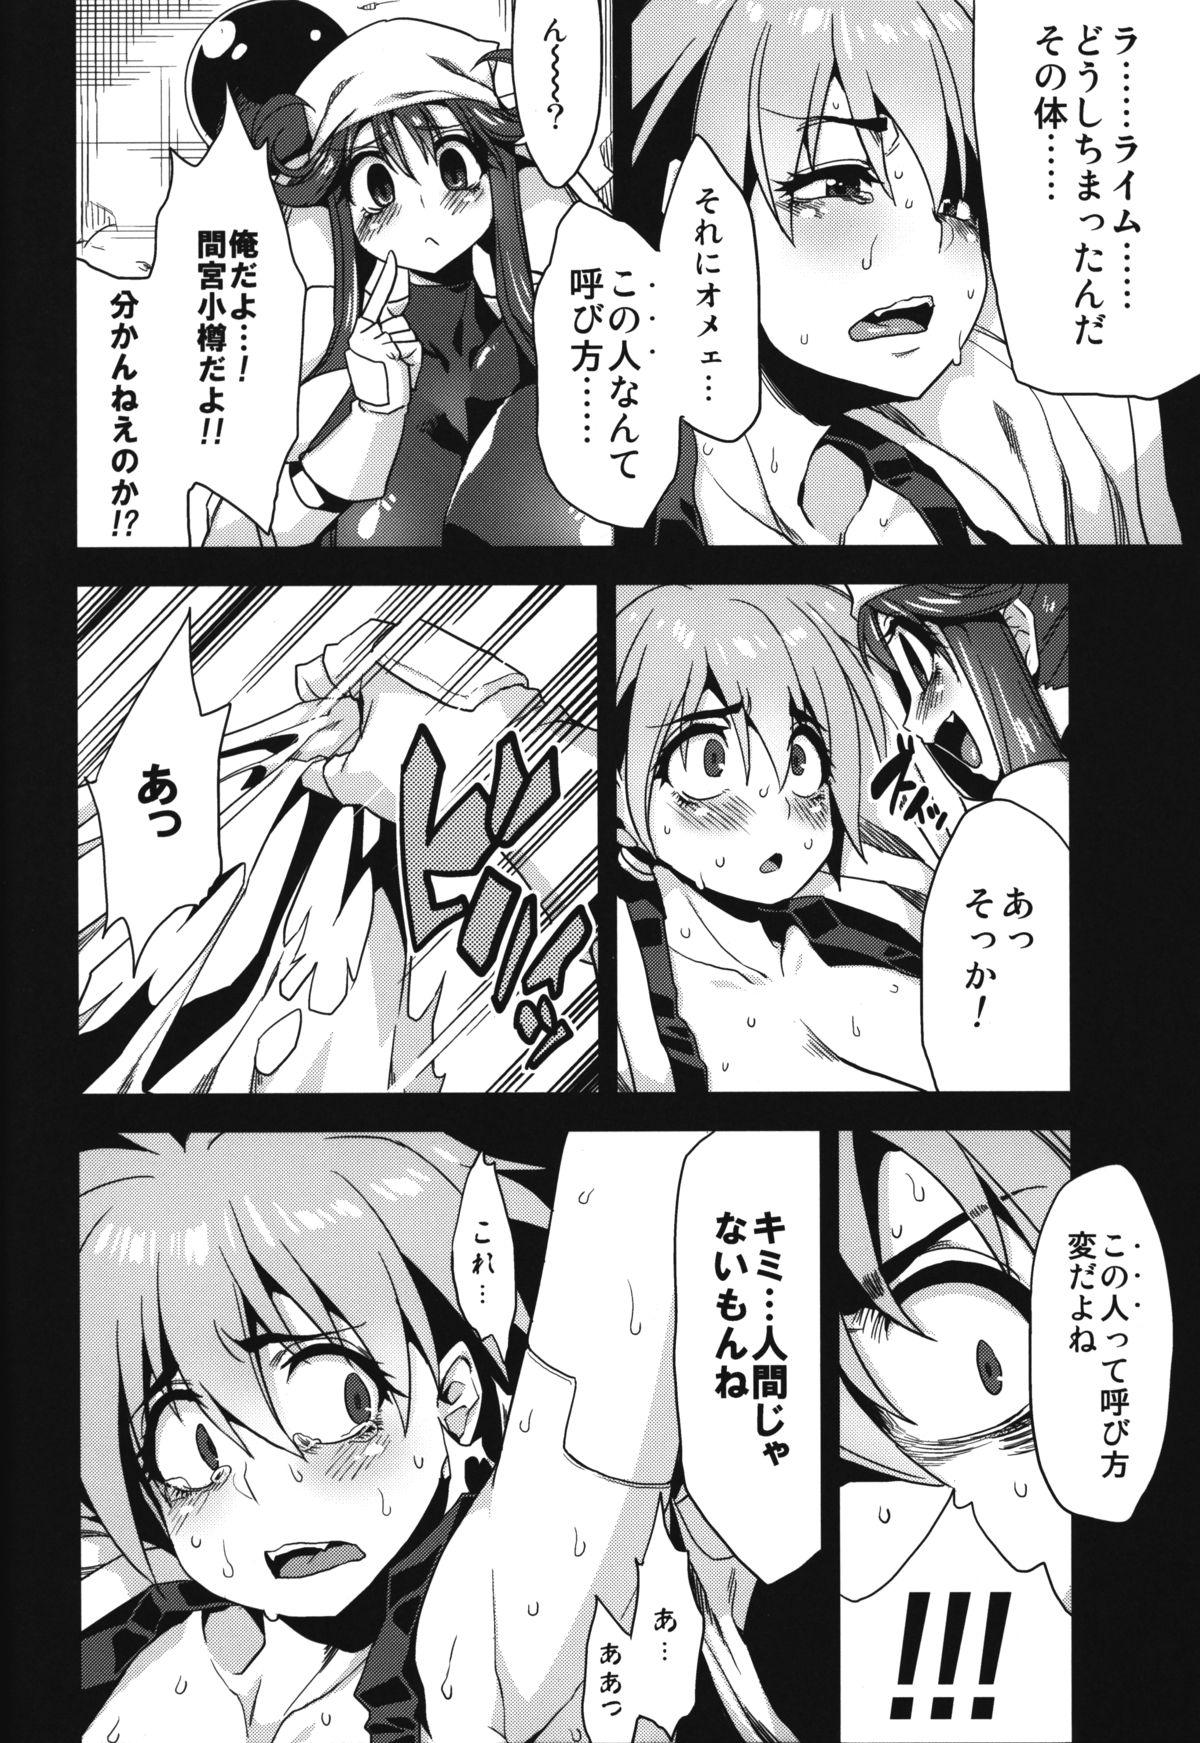 Fucking Hentai Marionette 3 - Saber marionette Gay Amateur - Page 5